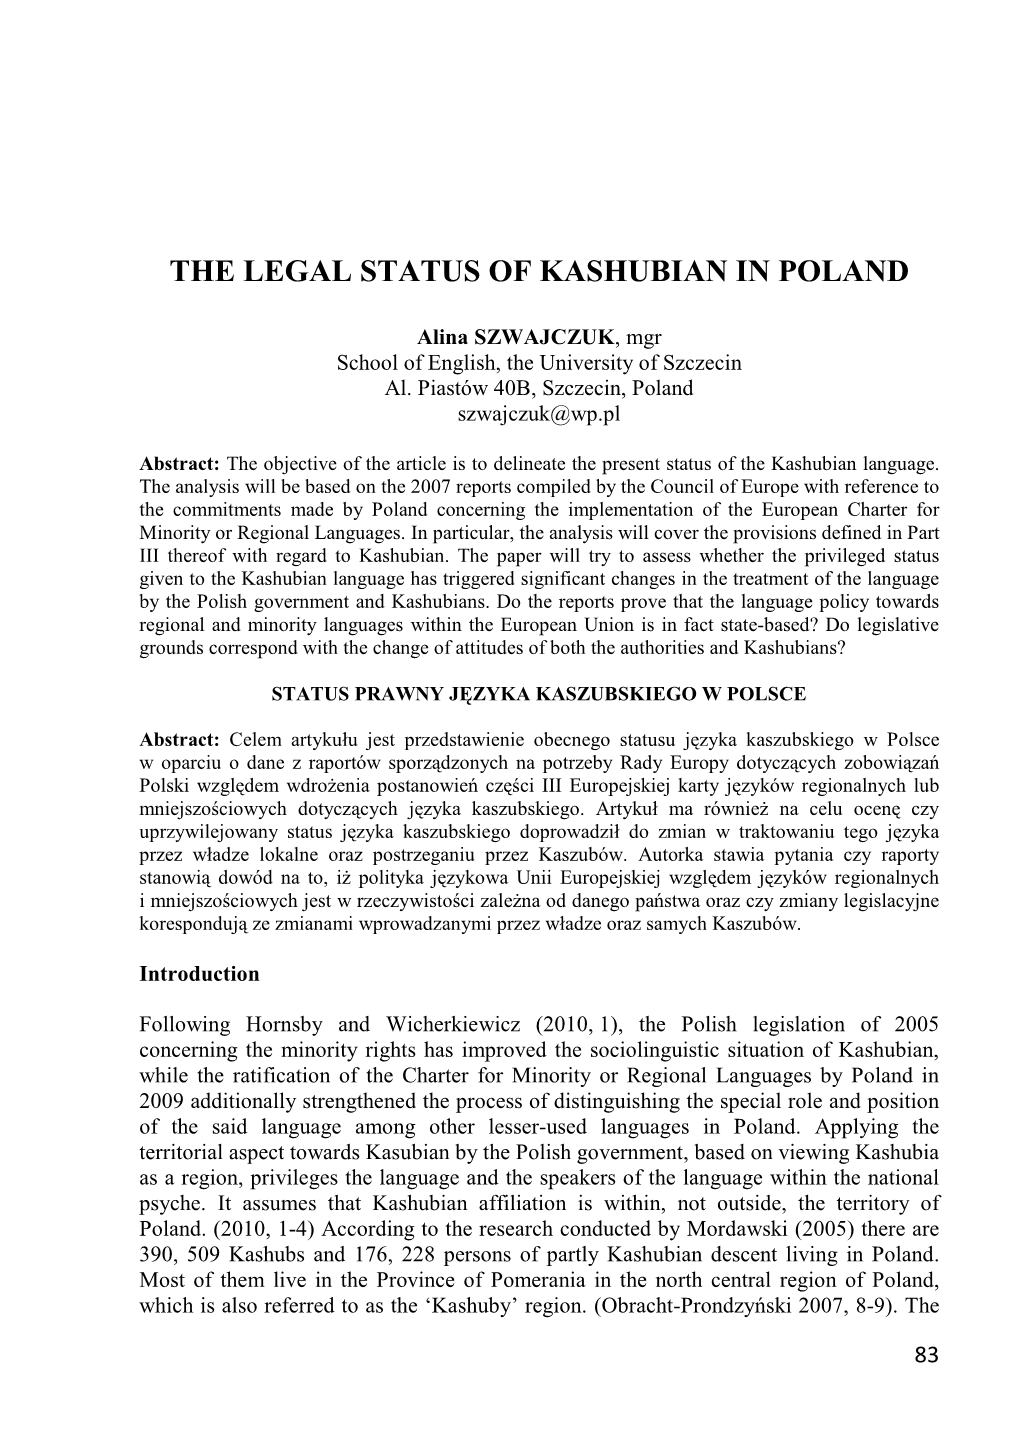 The Legal Status of Kashubian in Poland